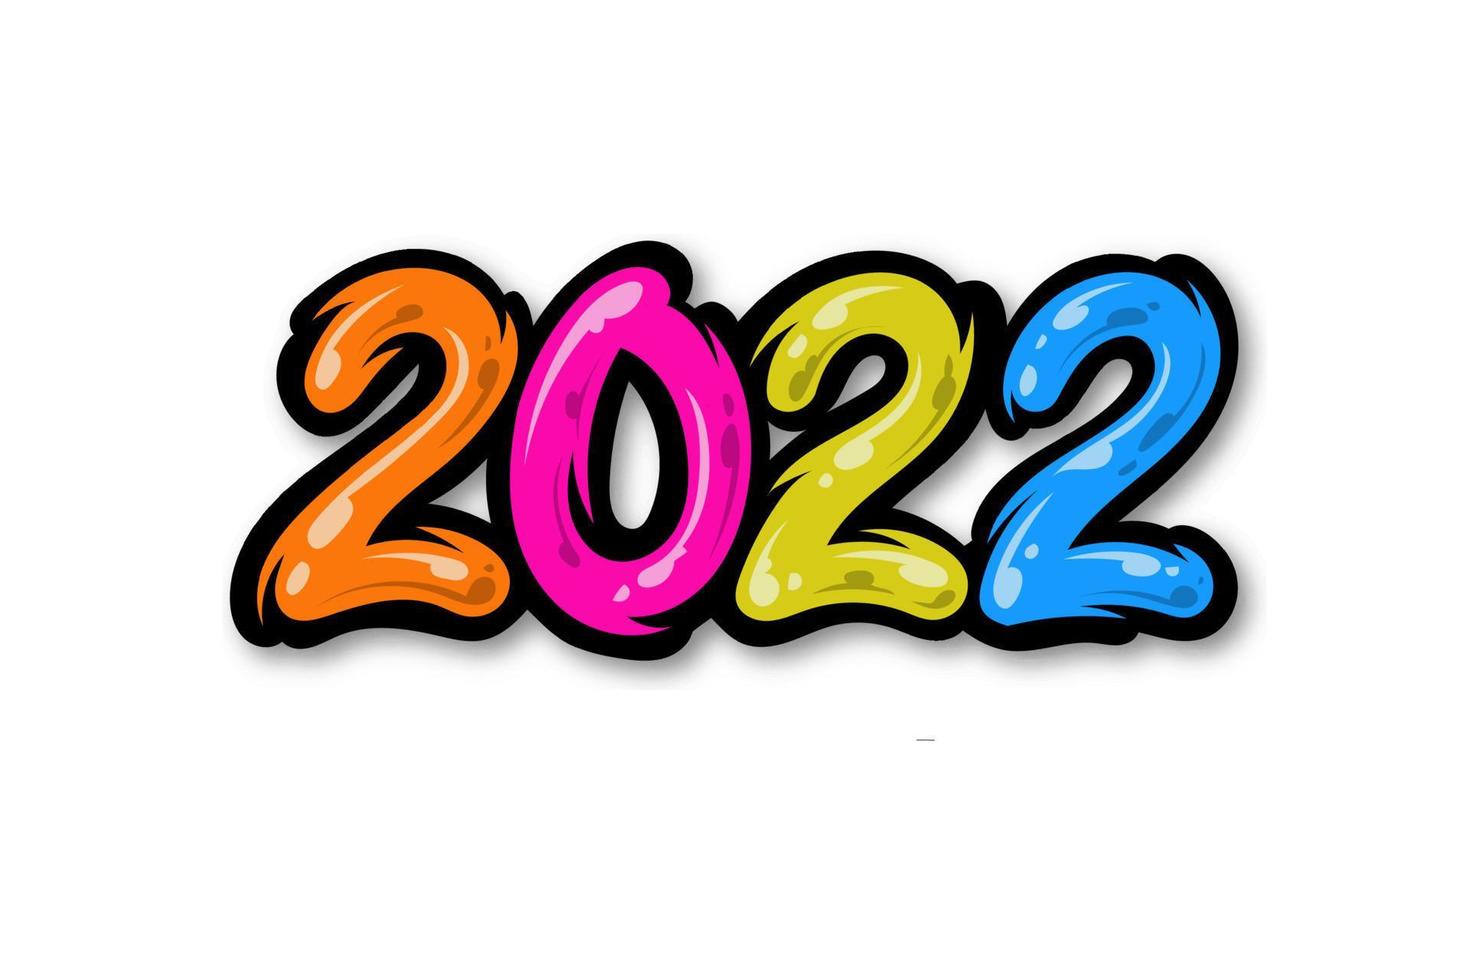 Vector image for Happy New Year 2022 with colorful Text. Suitable for greeting, invitations, banner or background design of 2022. Vector design illustration